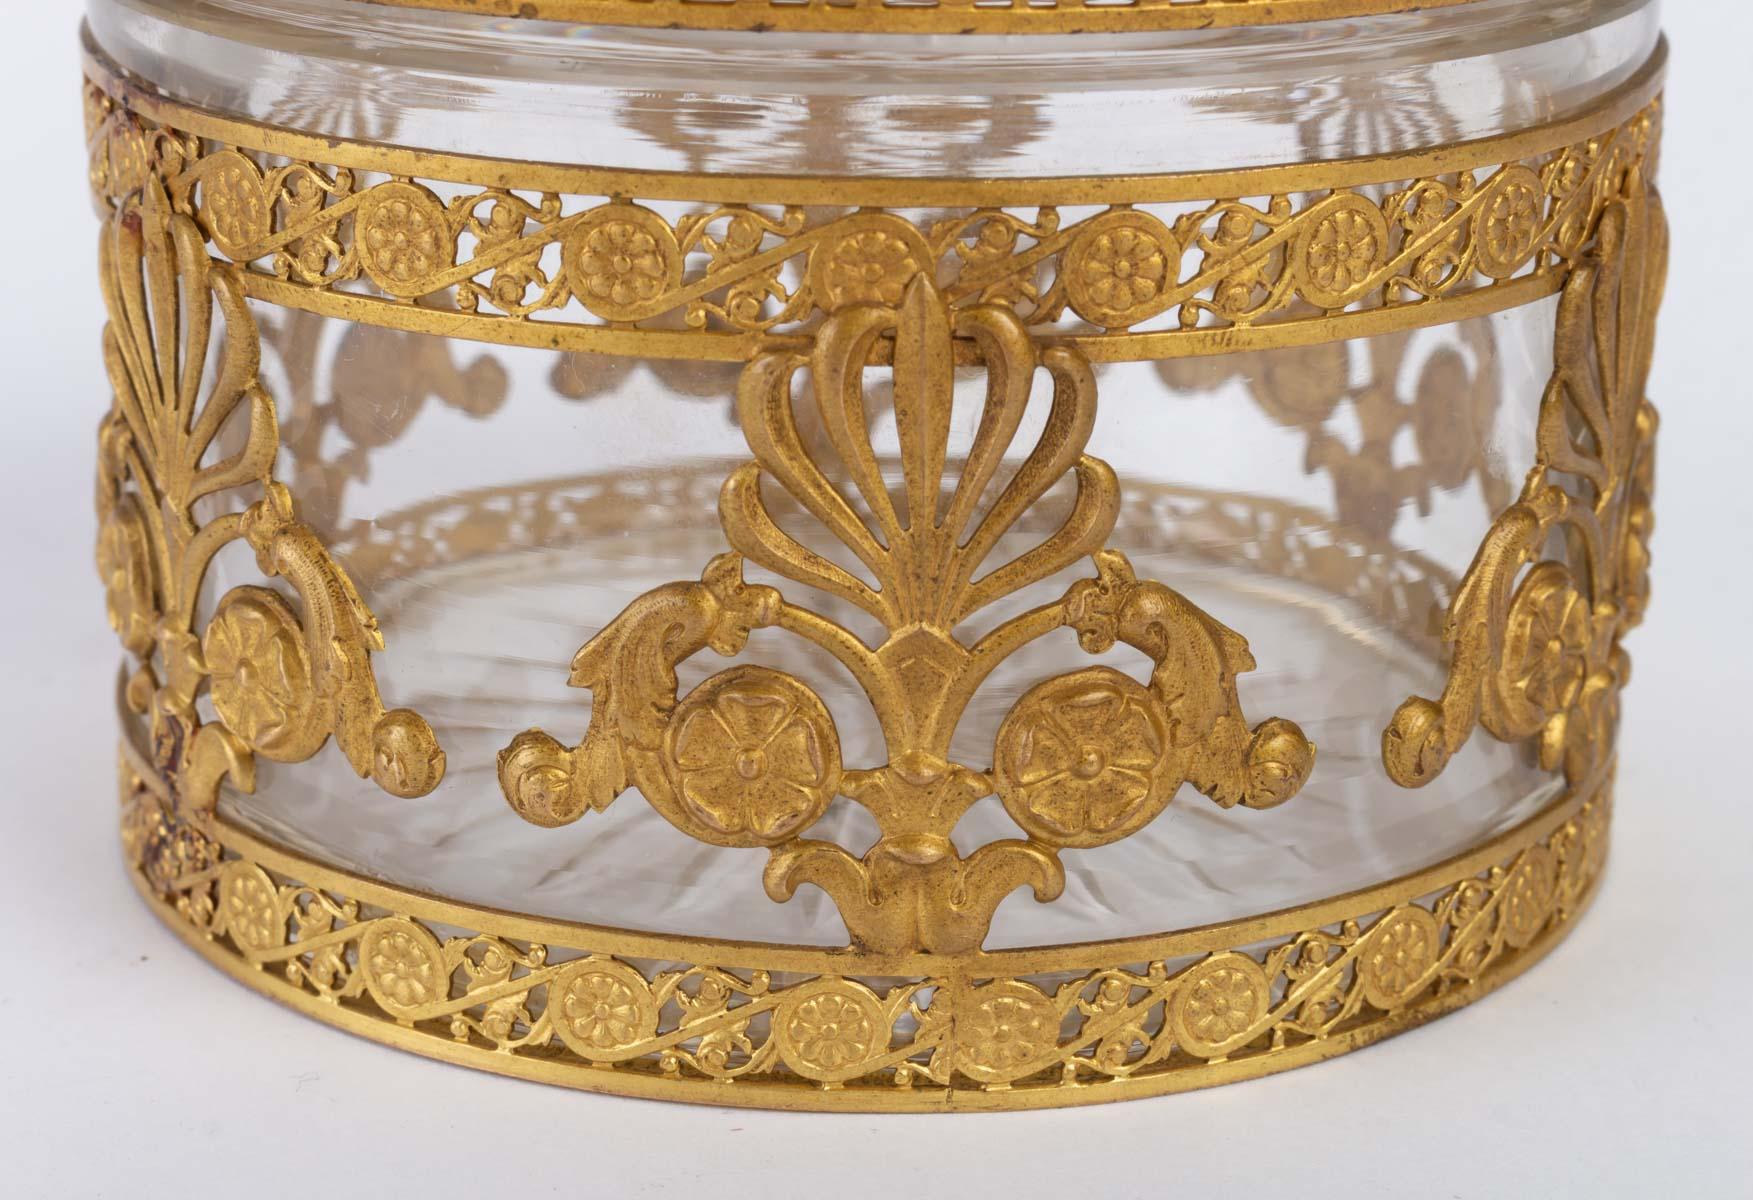 Gilt Crystal Box with Gilded Metal Frame Decorated with Palmettes and Interlacing